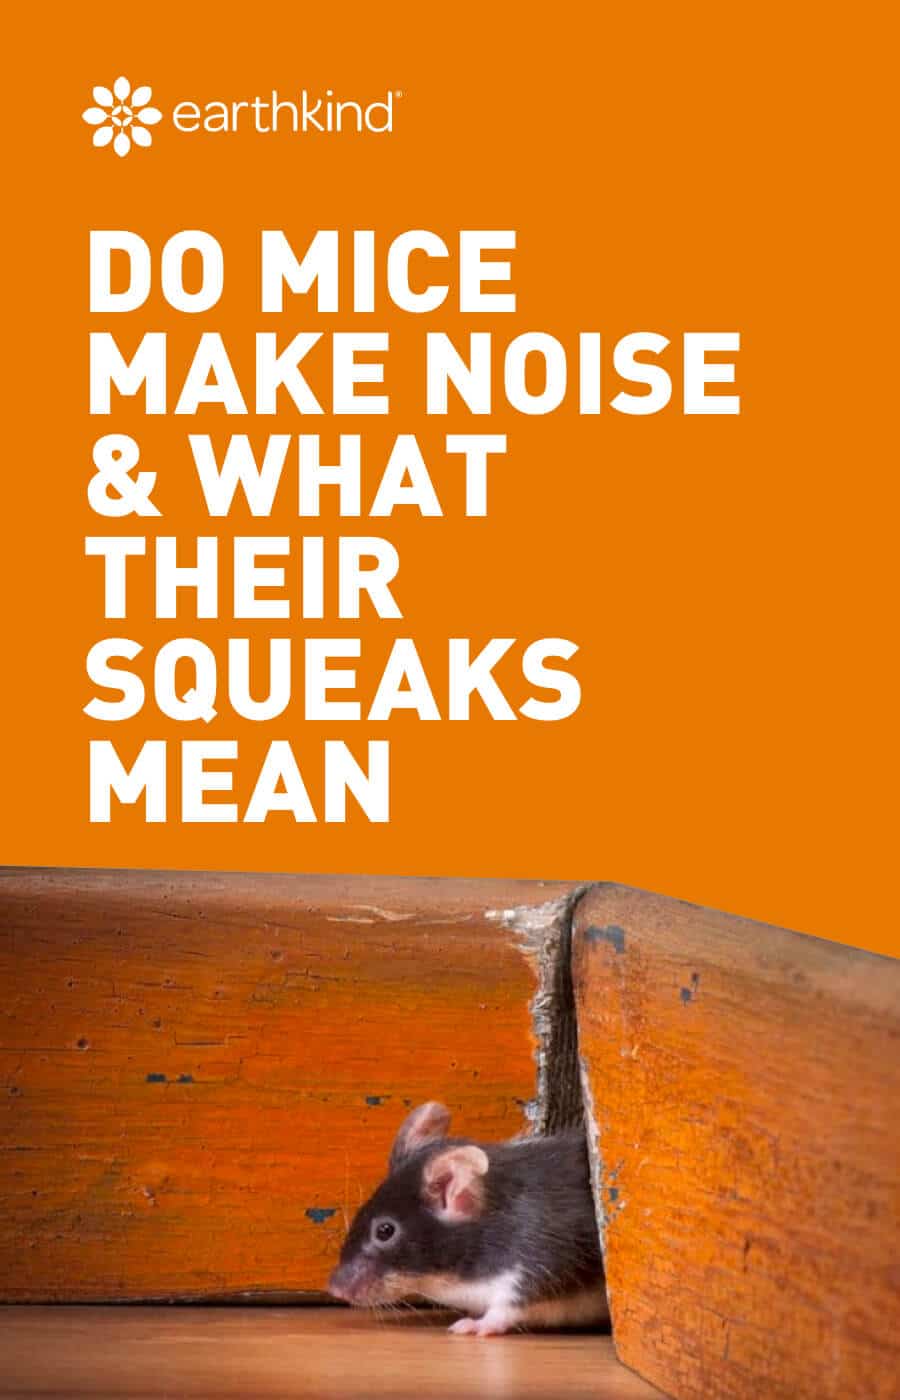 Mouse Sounds - Why Do Mice Squeak & What the Noises Mean